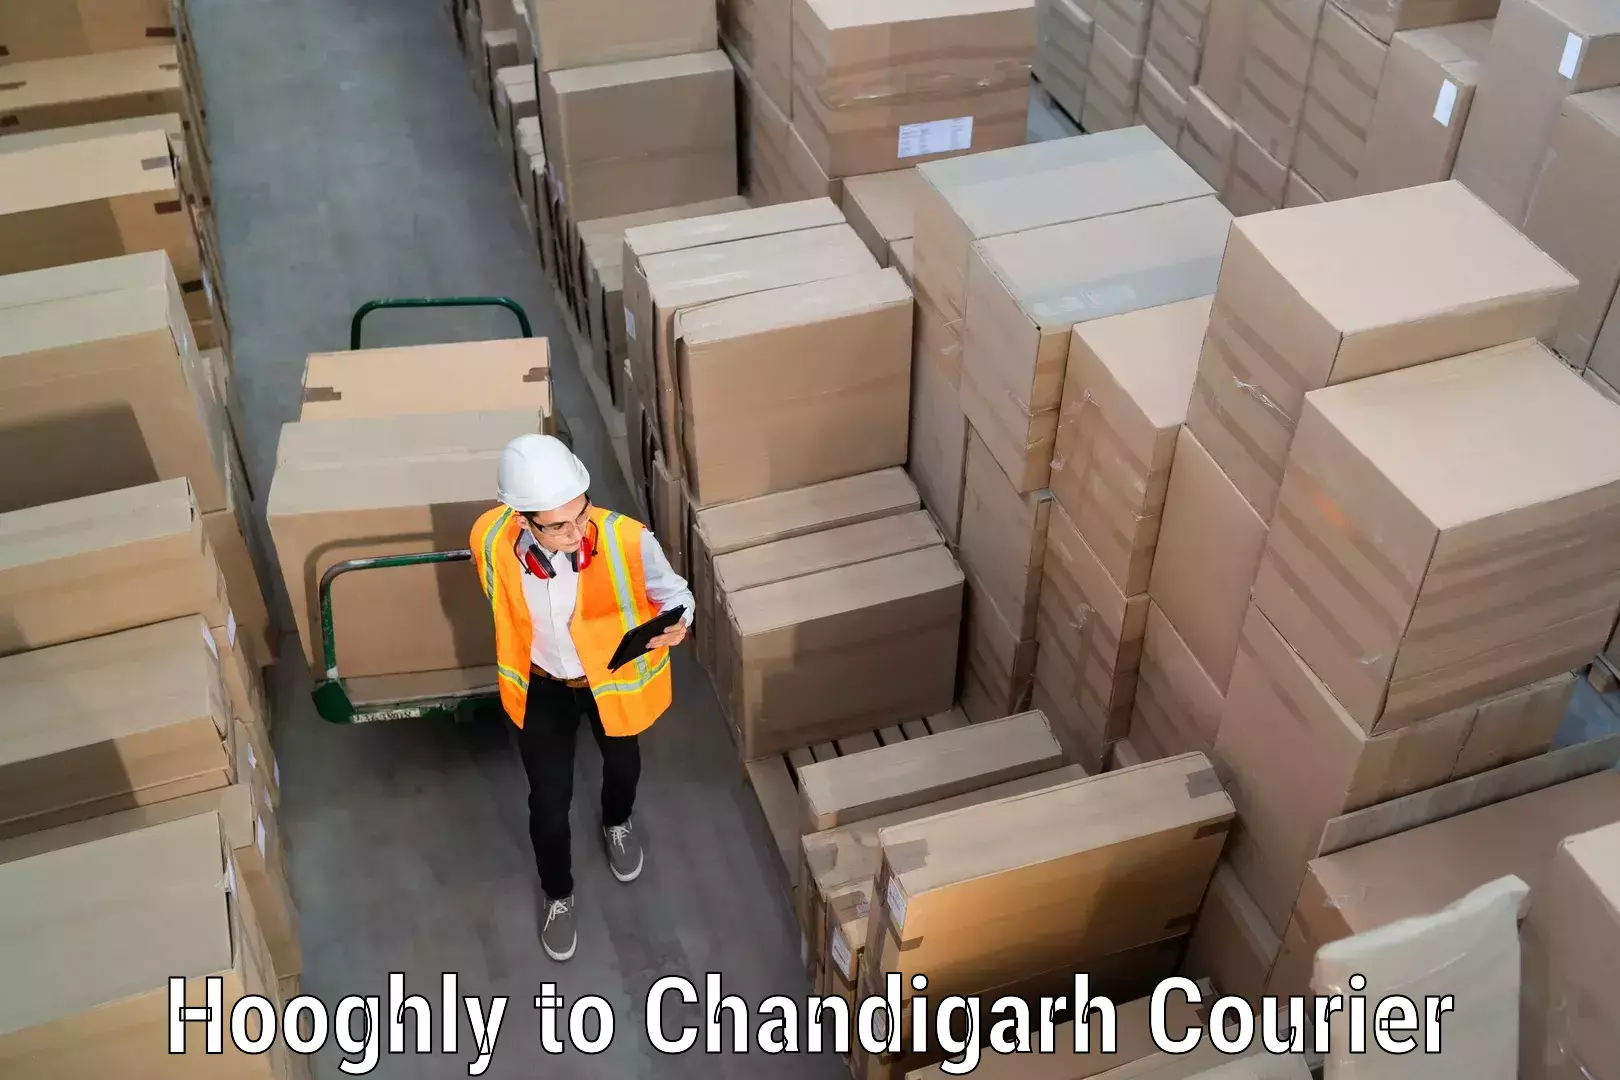 Trusted relocation experts Hooghly to Chandigarh